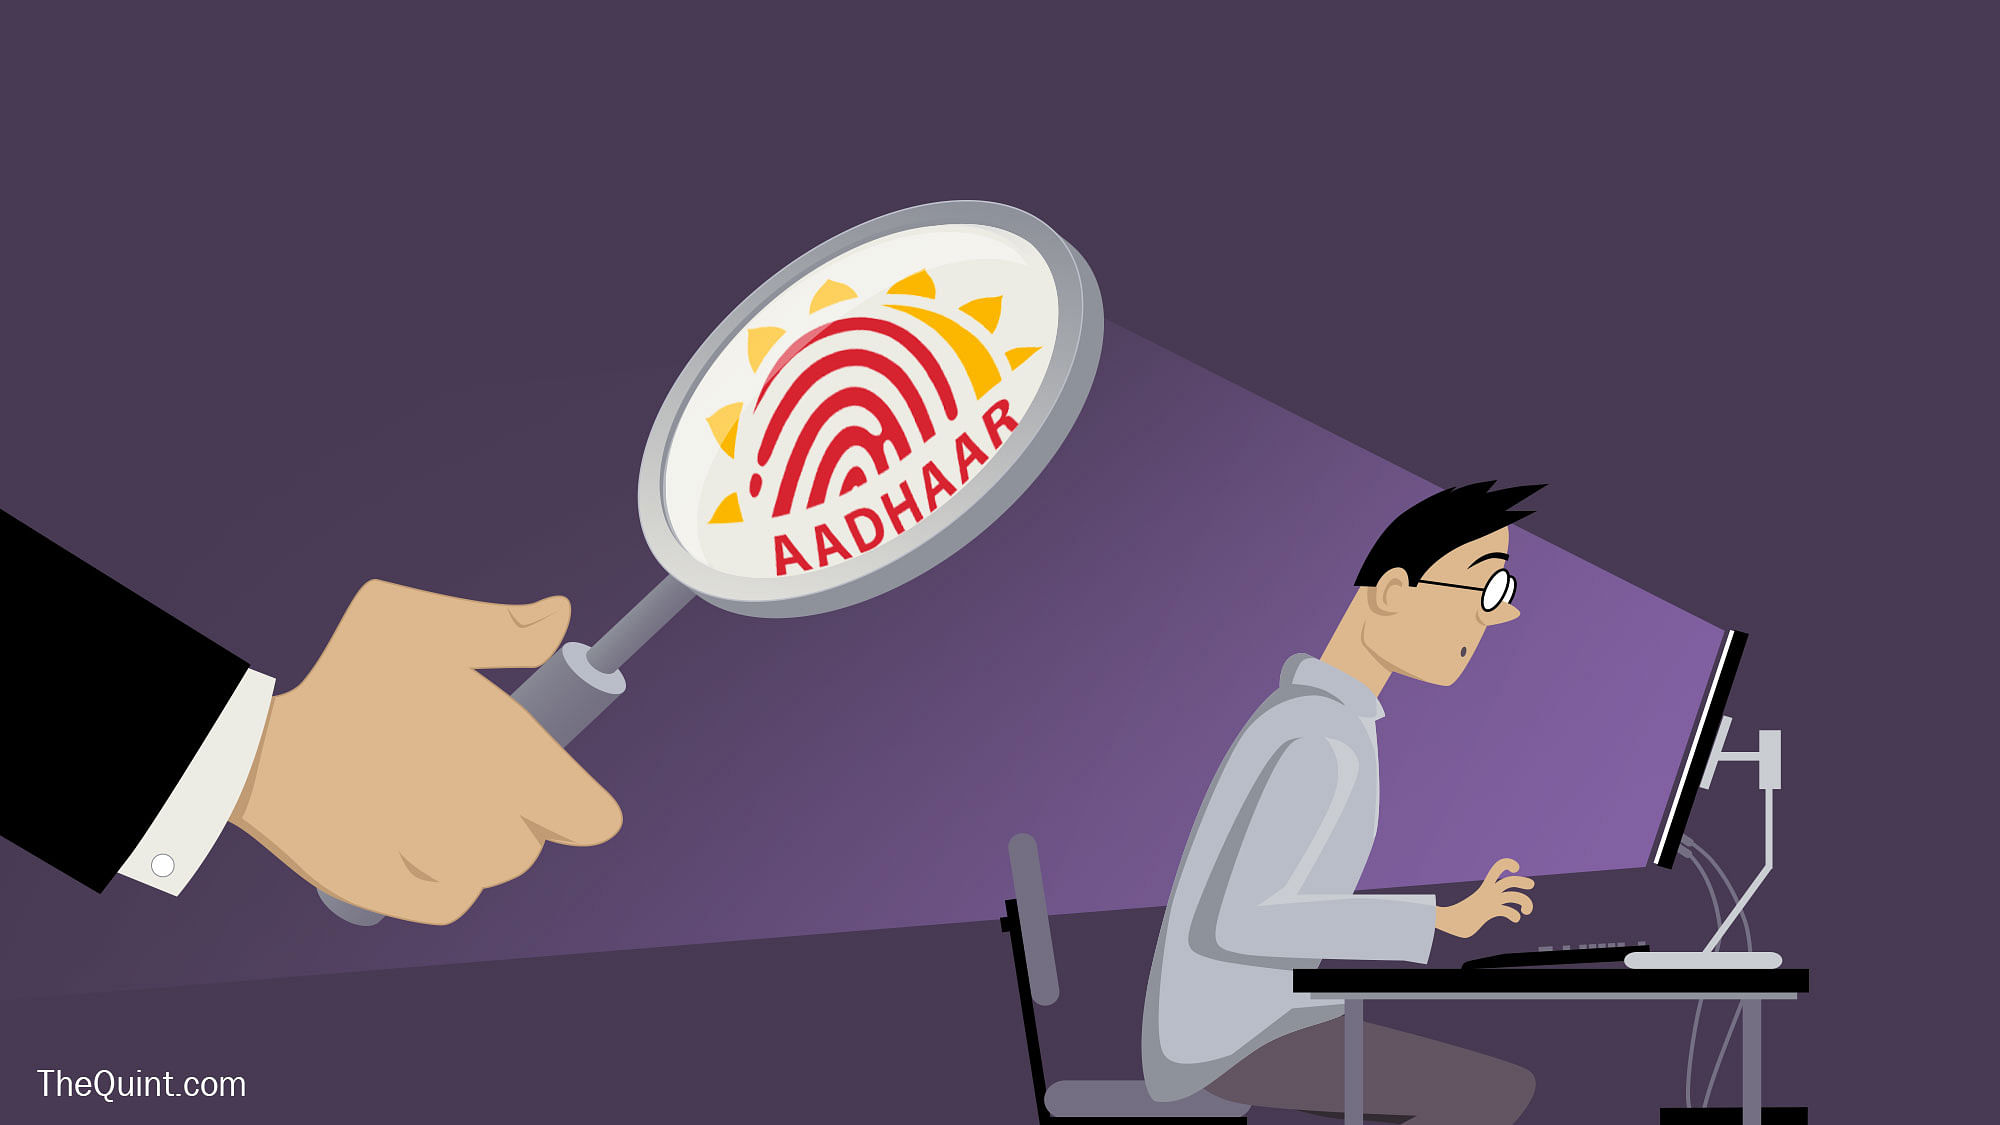 Beyond issues related to privacy, making Aadhaar mandatory is also an infringement on the fundamental rights of individuals. (Photo: Rahul Gupta/ <b>The Quint</b>)